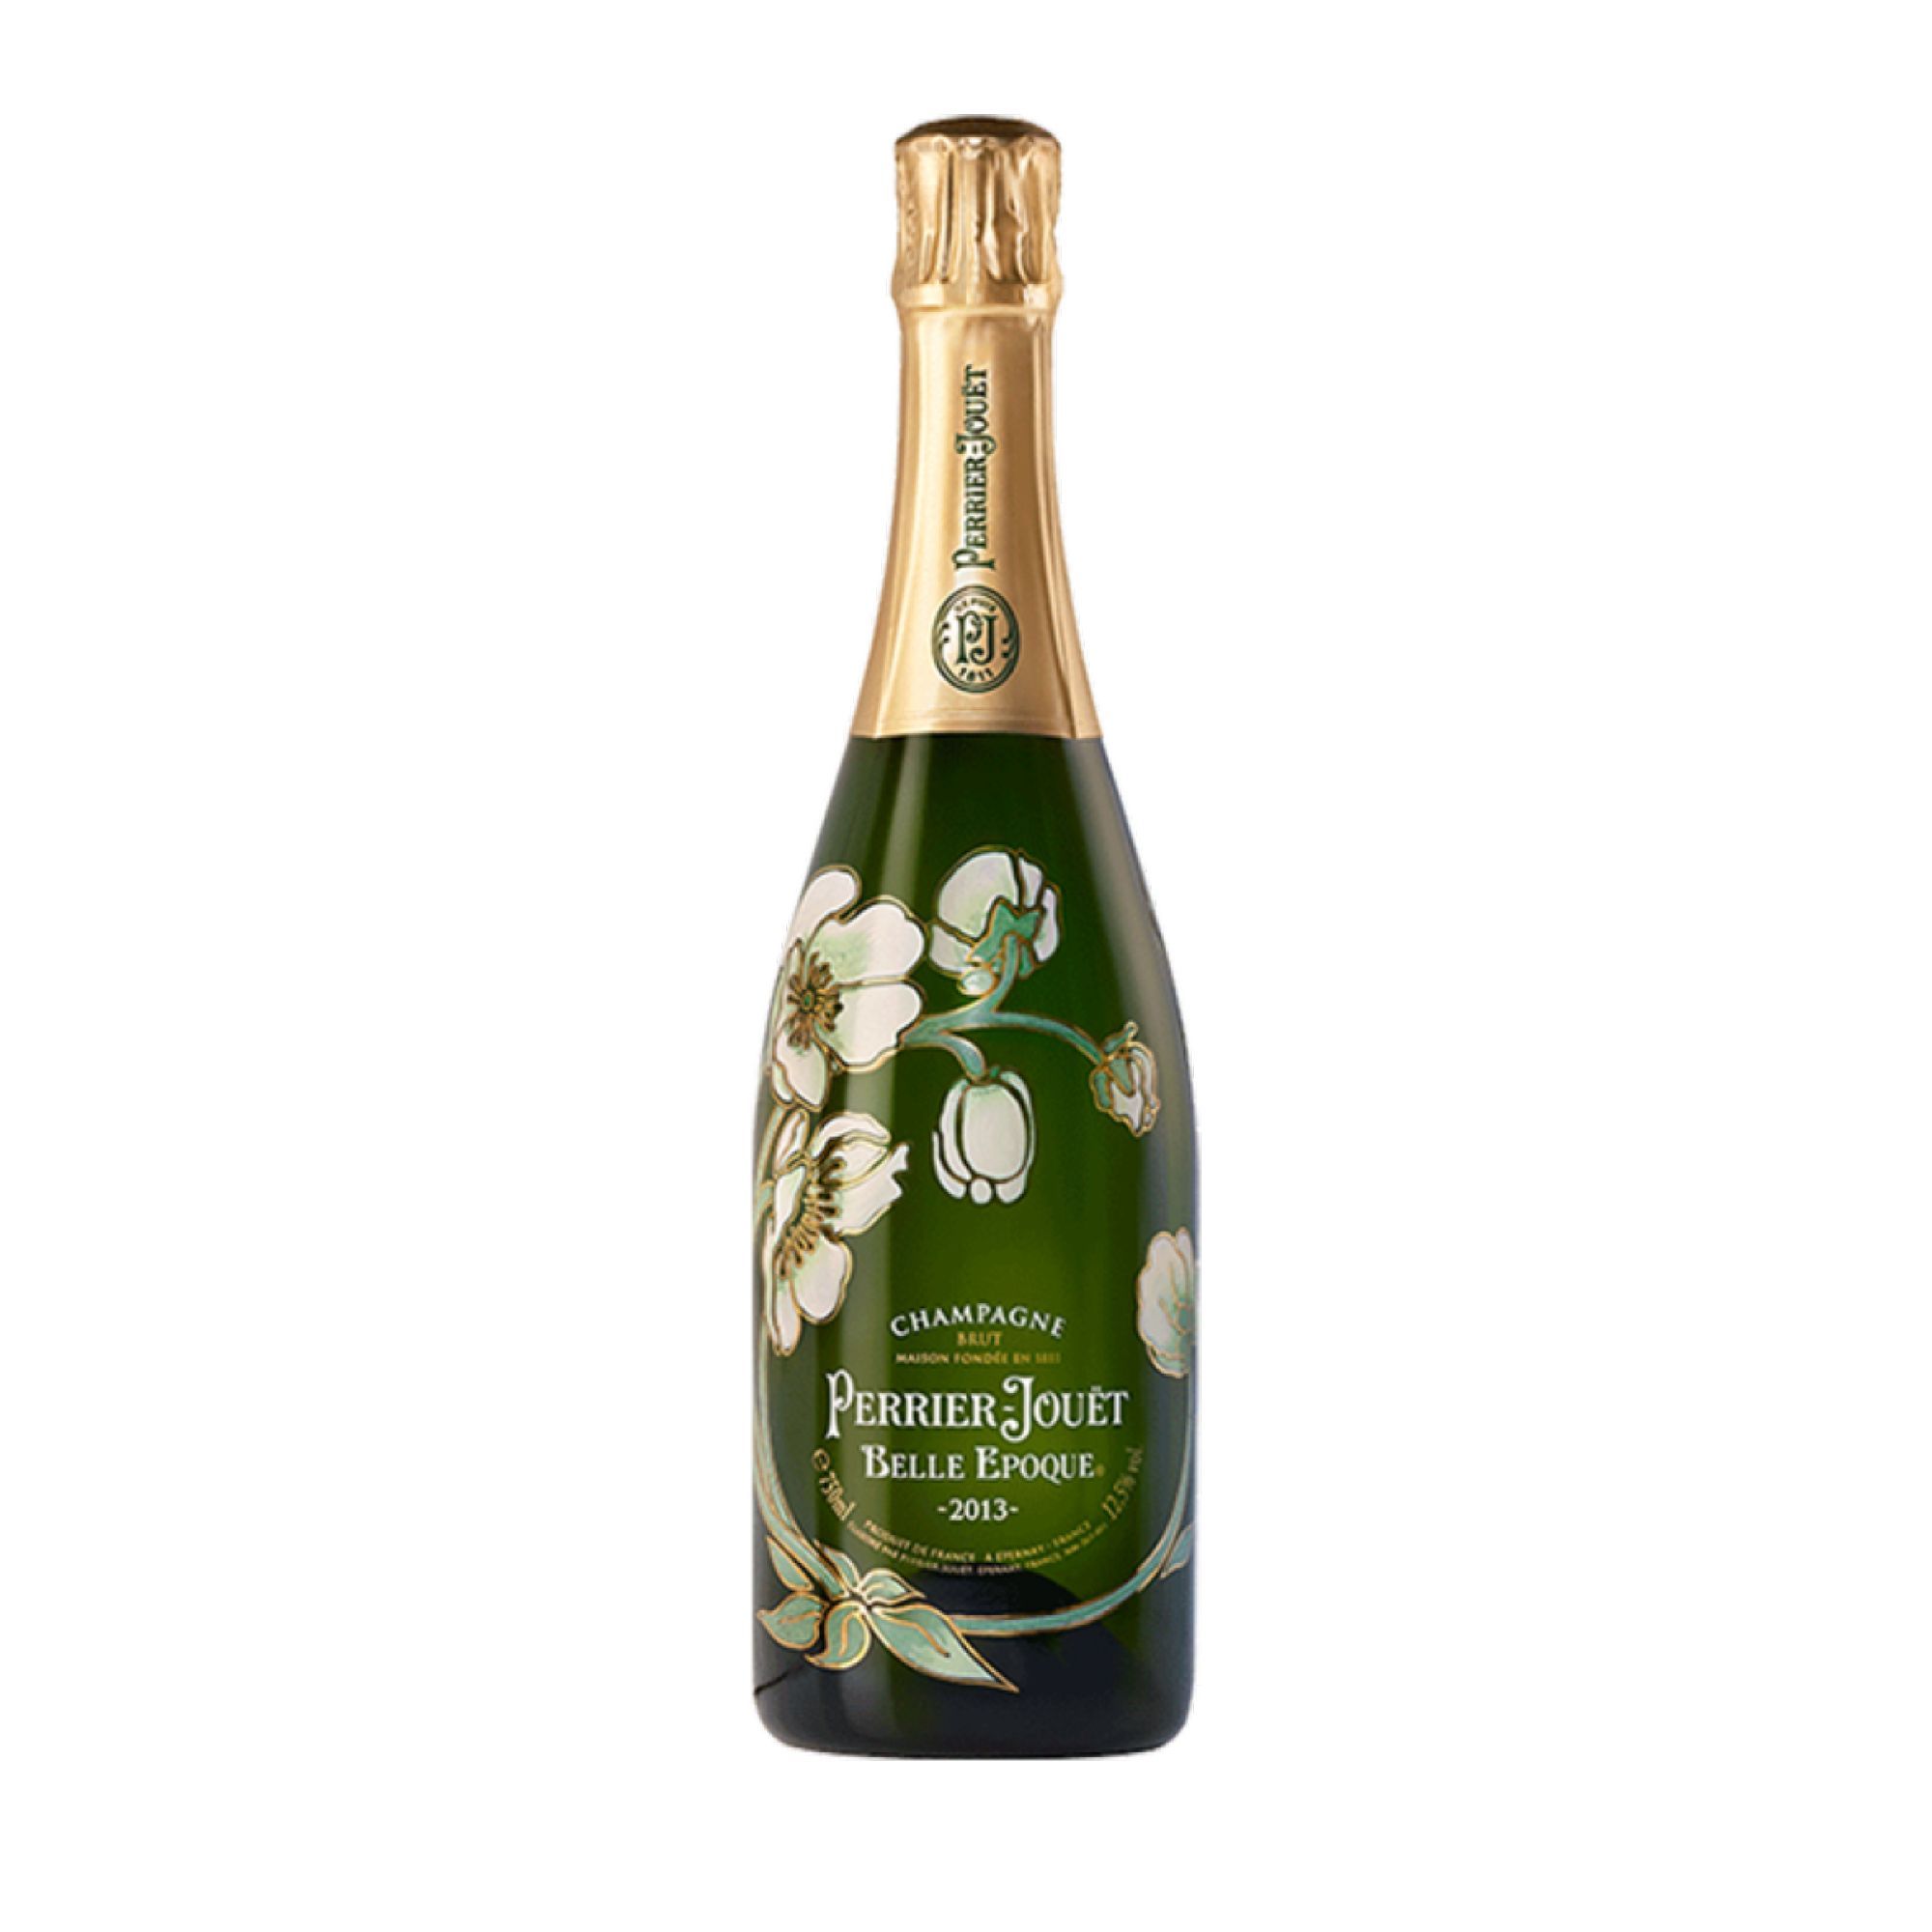 <p><strong>$229.00</strong></p><p><a href="https://www.perrier-jouet.com/en-us/champagnes/belle-epoque-2013">Shop Now</a></p><p>Of course, anniversary celebrations call for a special bottle of bubbles. How about Perrier-Jouët's Belle Époque—a rare and elegant champagne that's fresh and delicate on the nose with distinctive aromas of white fruit and flowers to finesse the palette?</p>